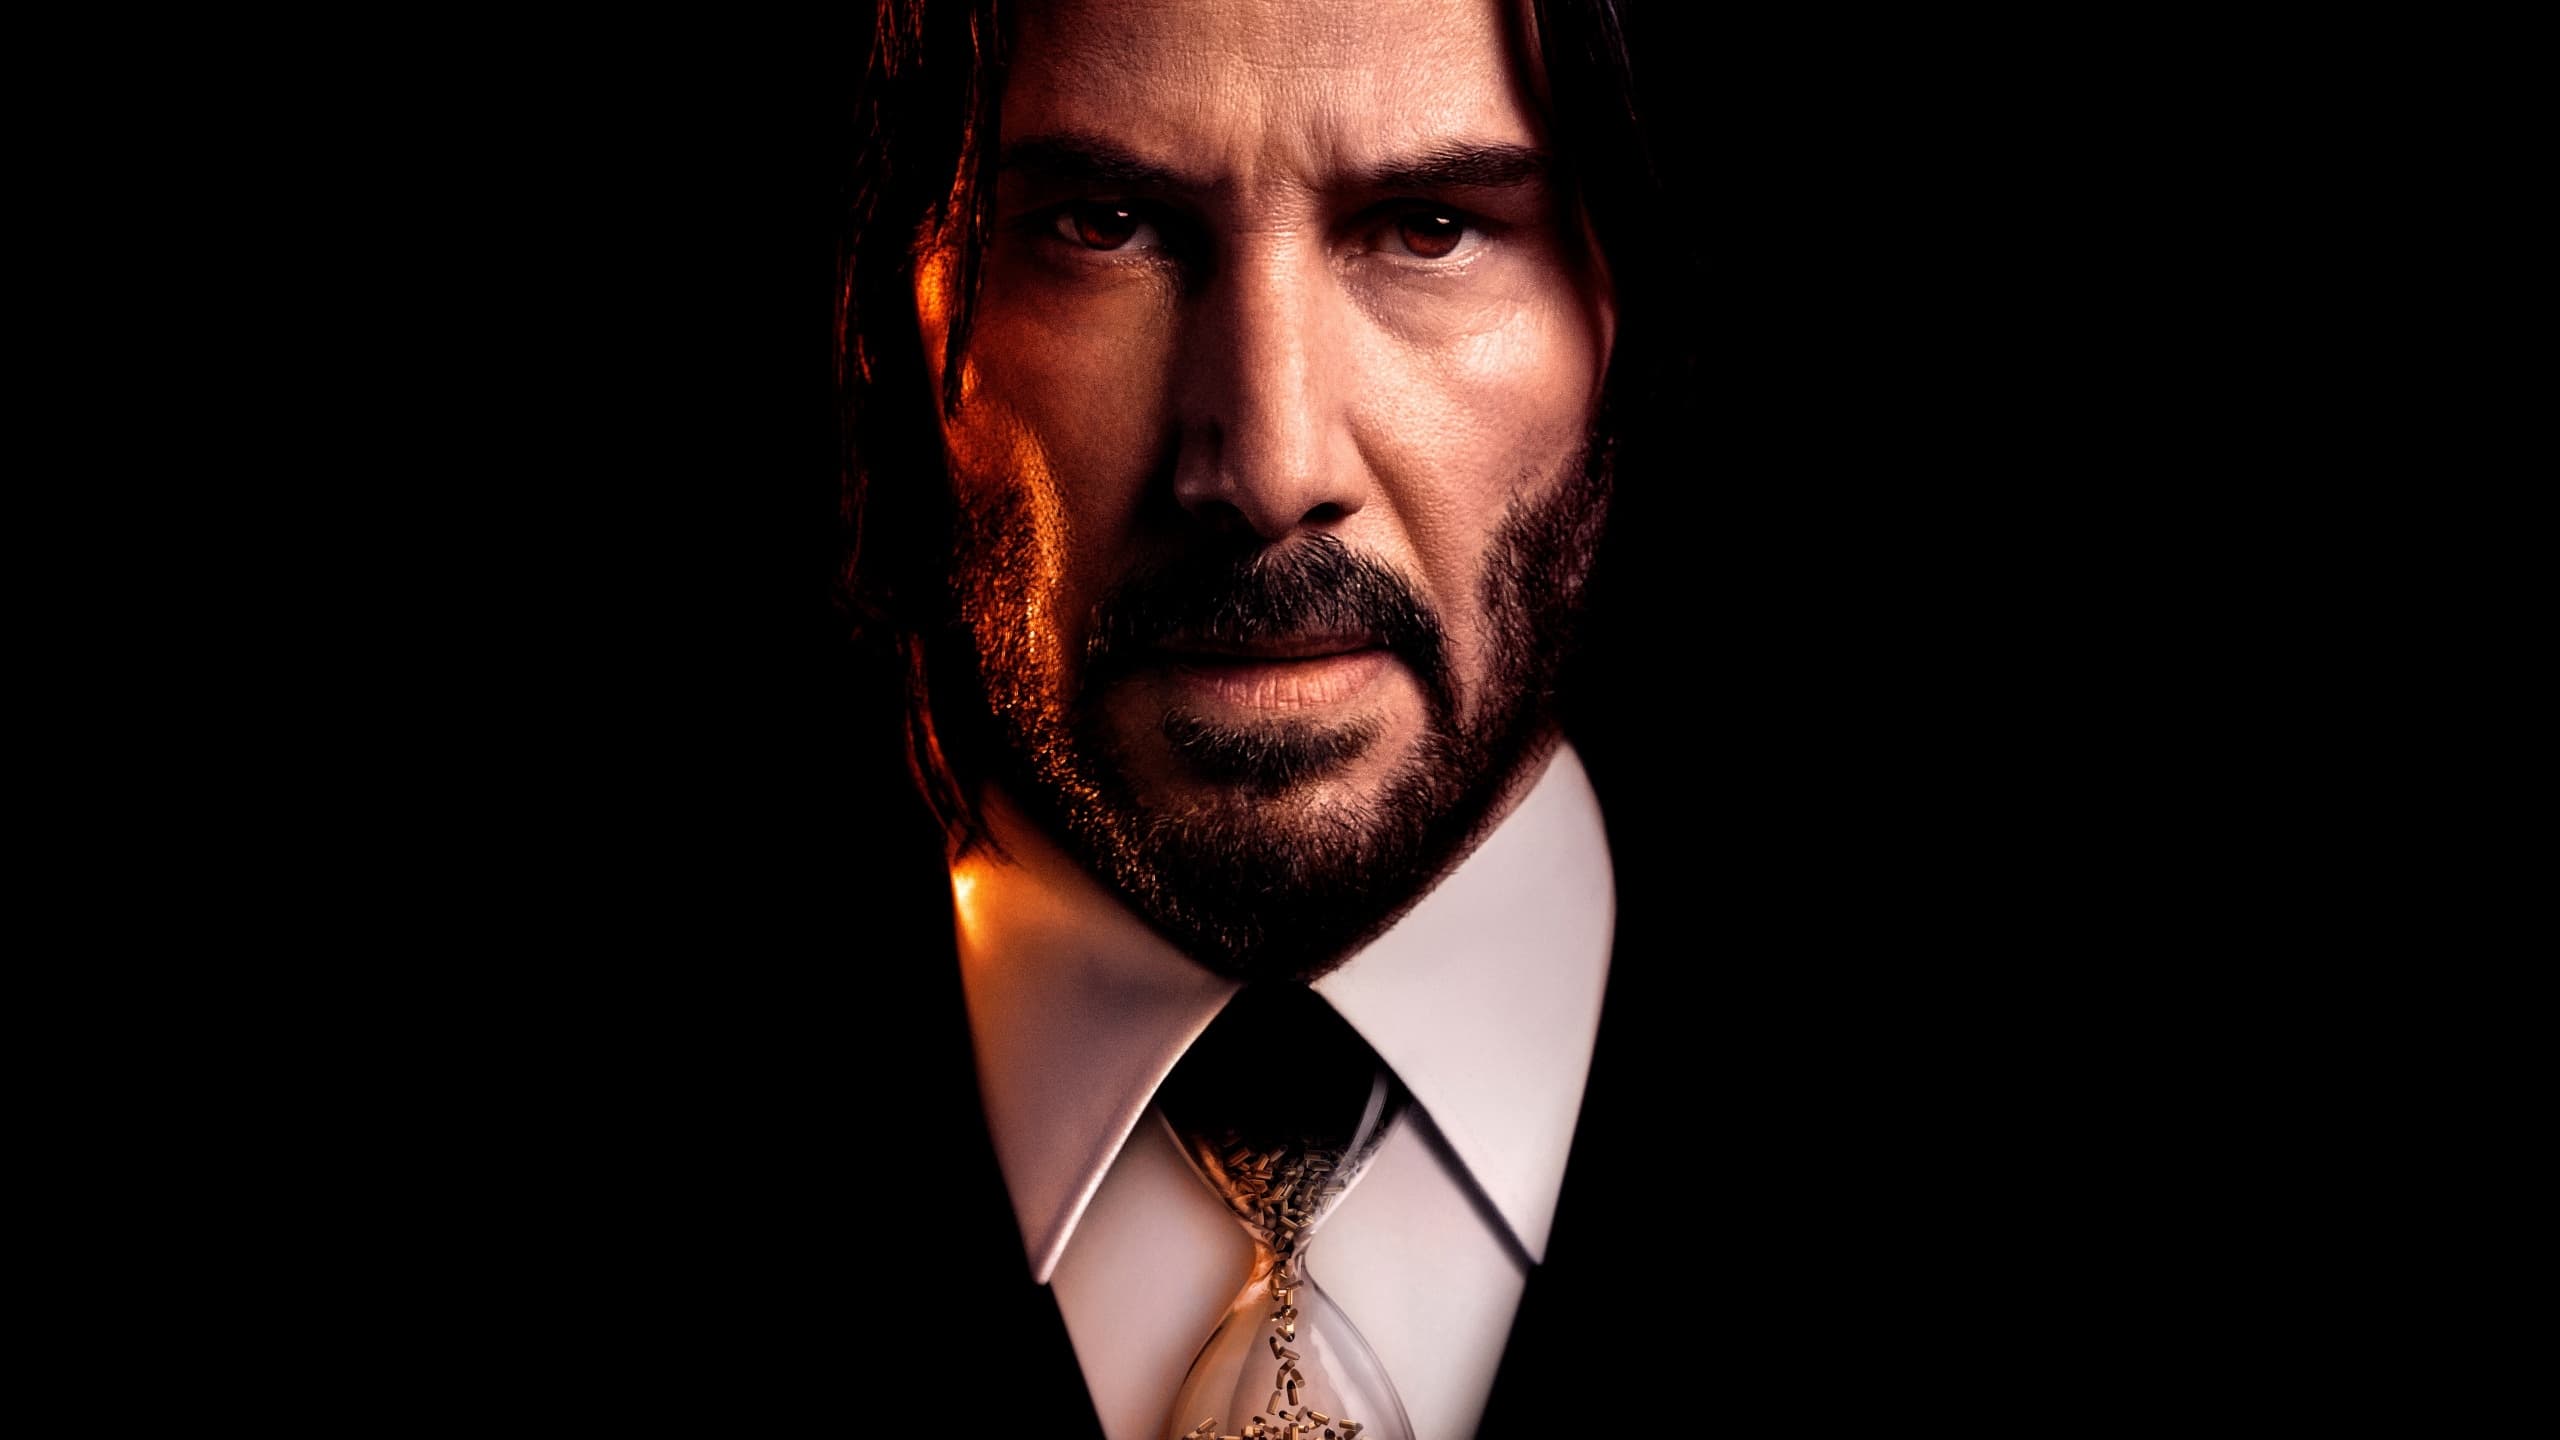 Watch John Wick: Chapter 4 (2023) Full Movie Online Free | Stream Free Movies & TV Shows